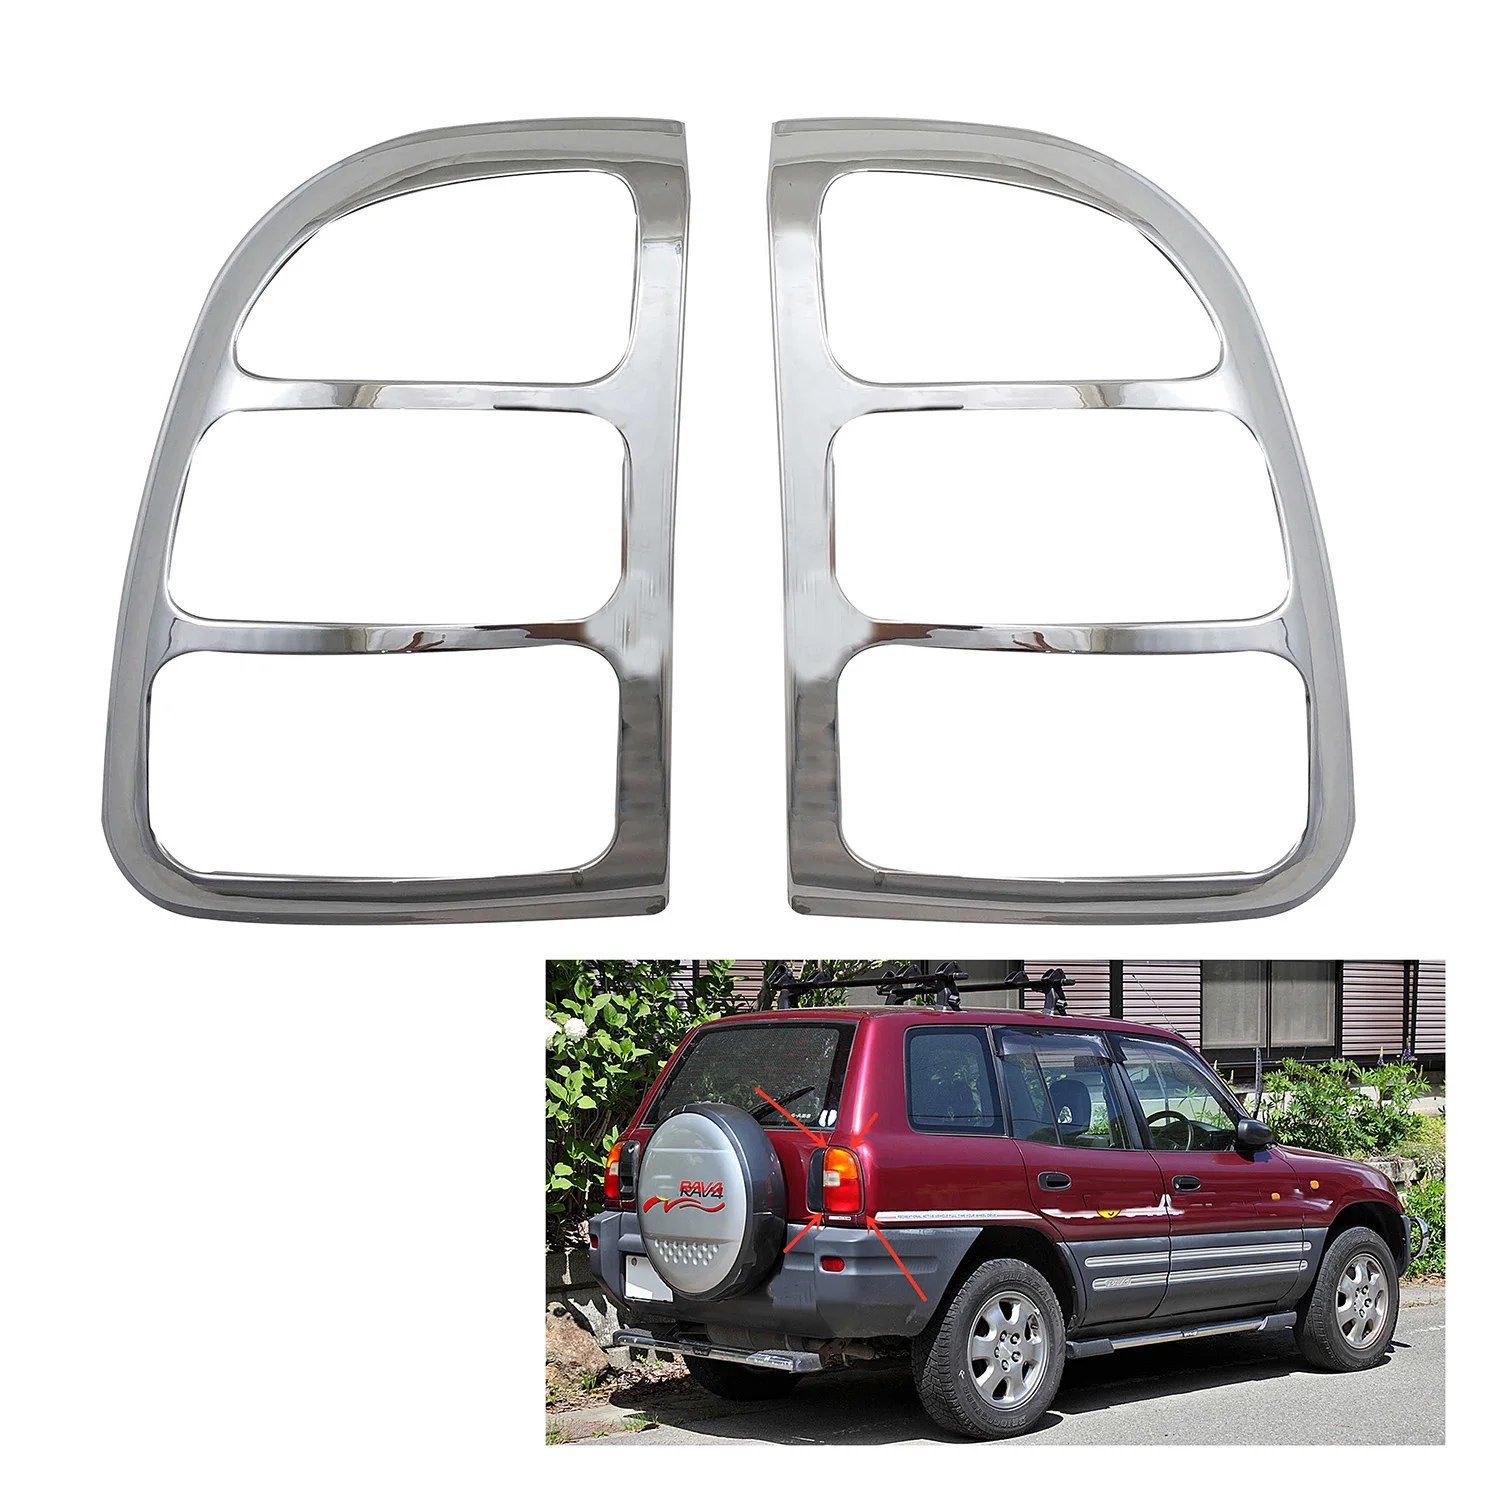 

New ABS Chrome Car Accessories Plated Tail Lamp Cover Trim Paste Style For Toyota rav4 RAV 4 1996 1997 1998 1999 2000